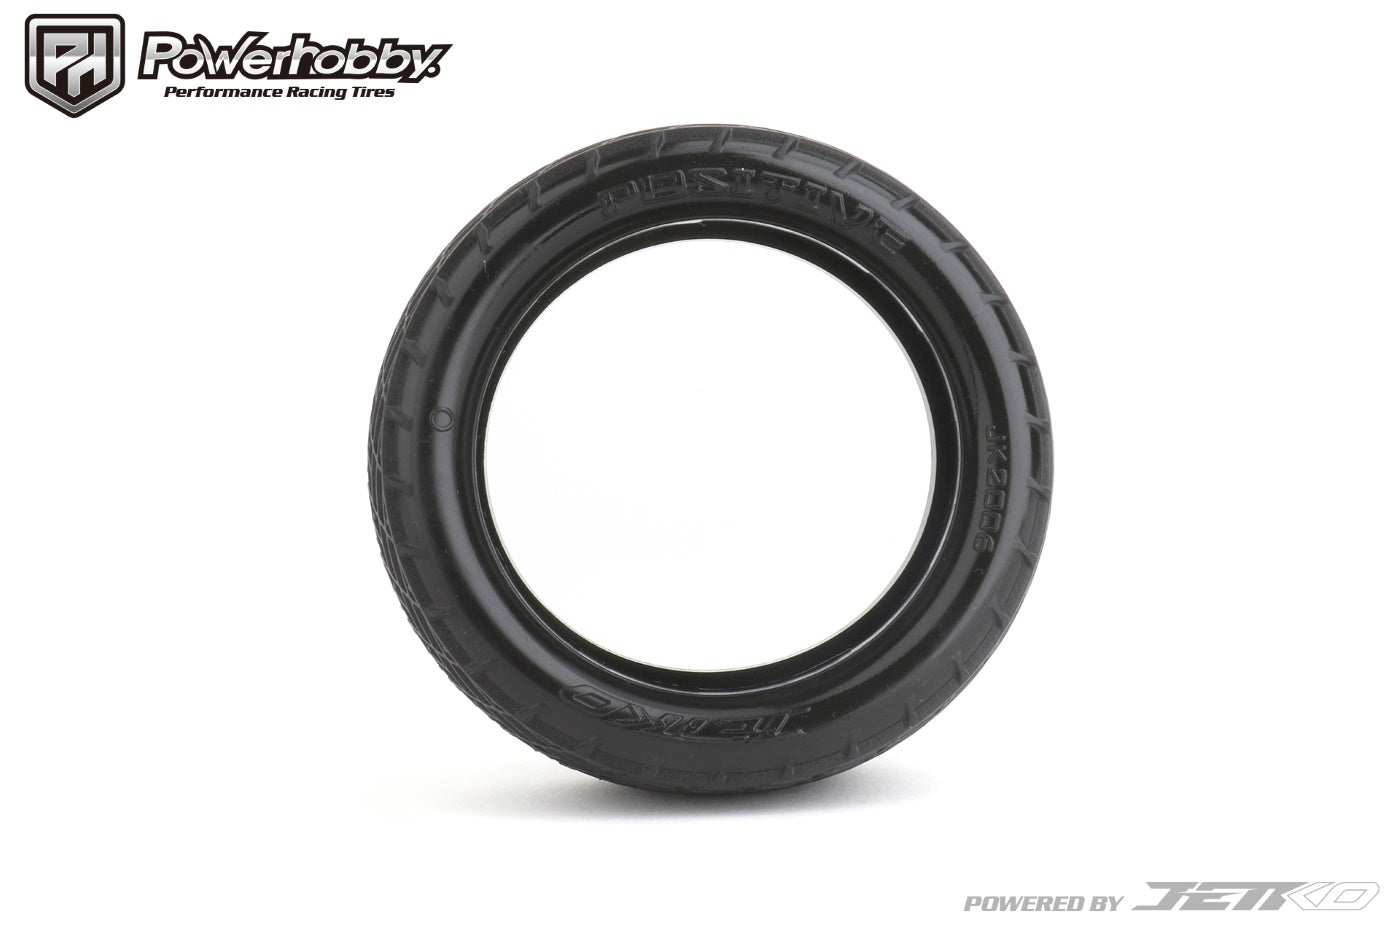 Powerhobby Positive 1/10 4WD Buggy Front Clay Tires Ultra Soft - PowerHobby